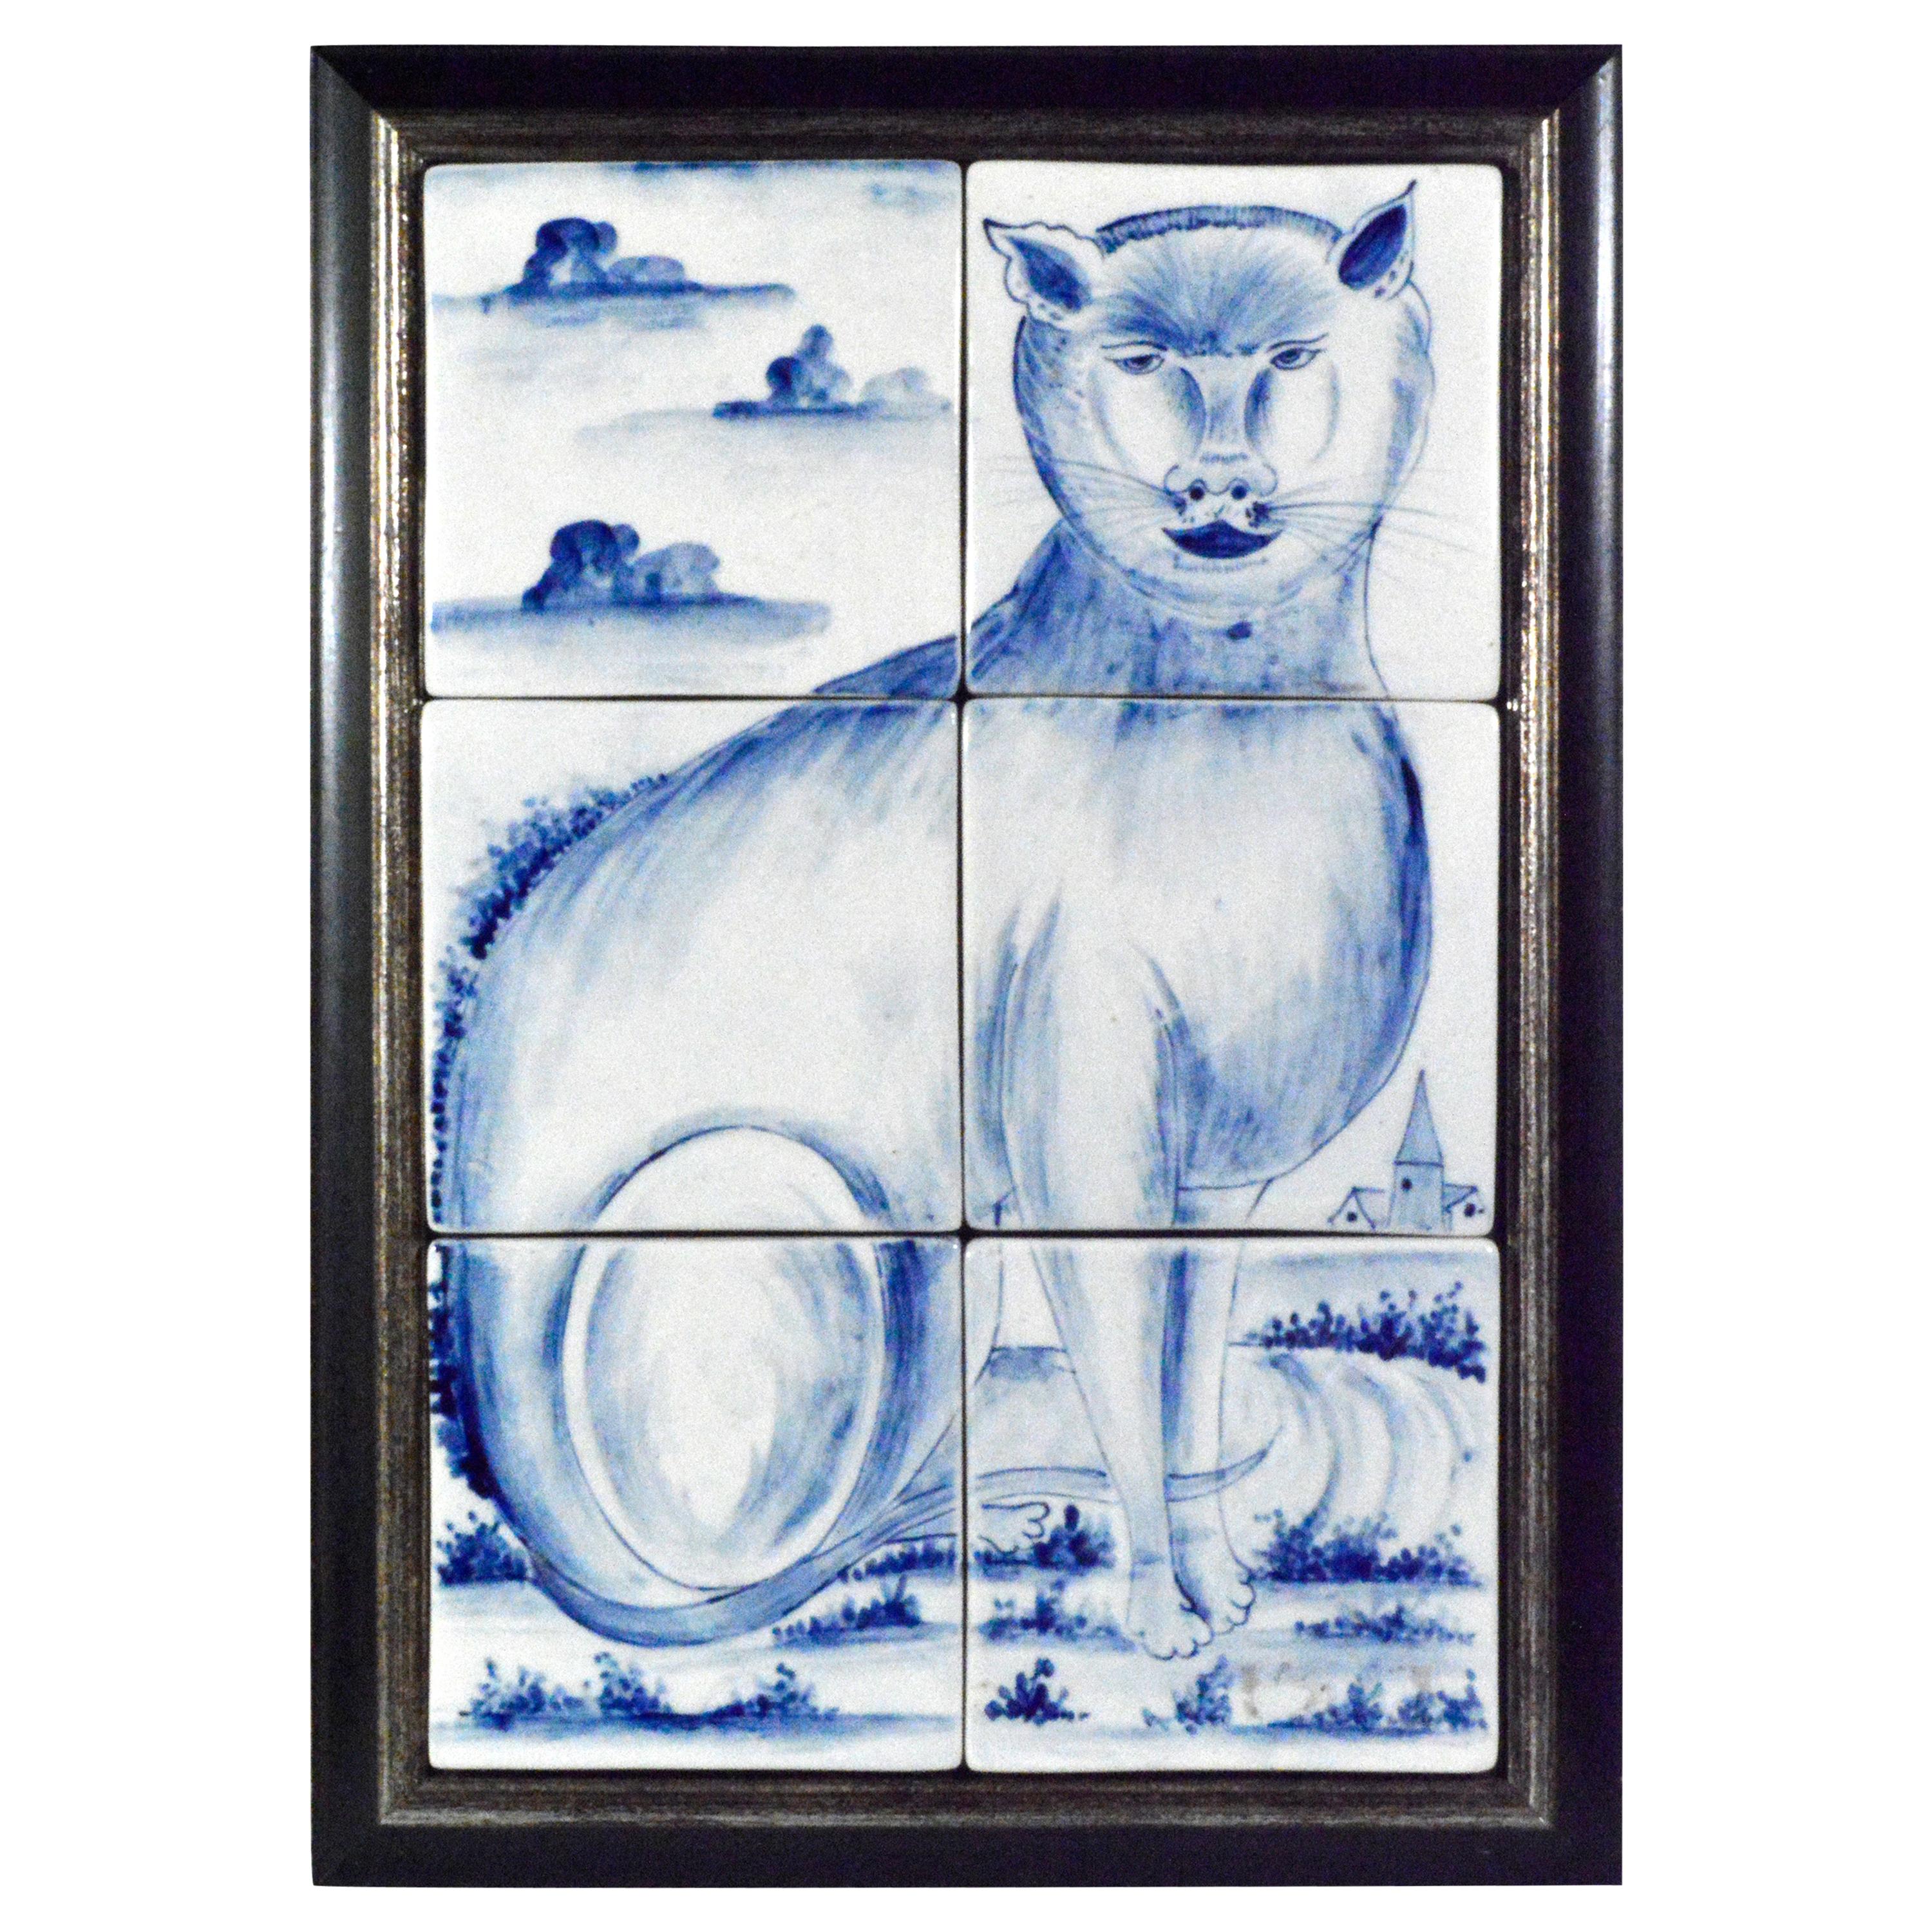 Charming Dutch Tin-Glazed Earthenware Tile Picture of a Cat For Sale